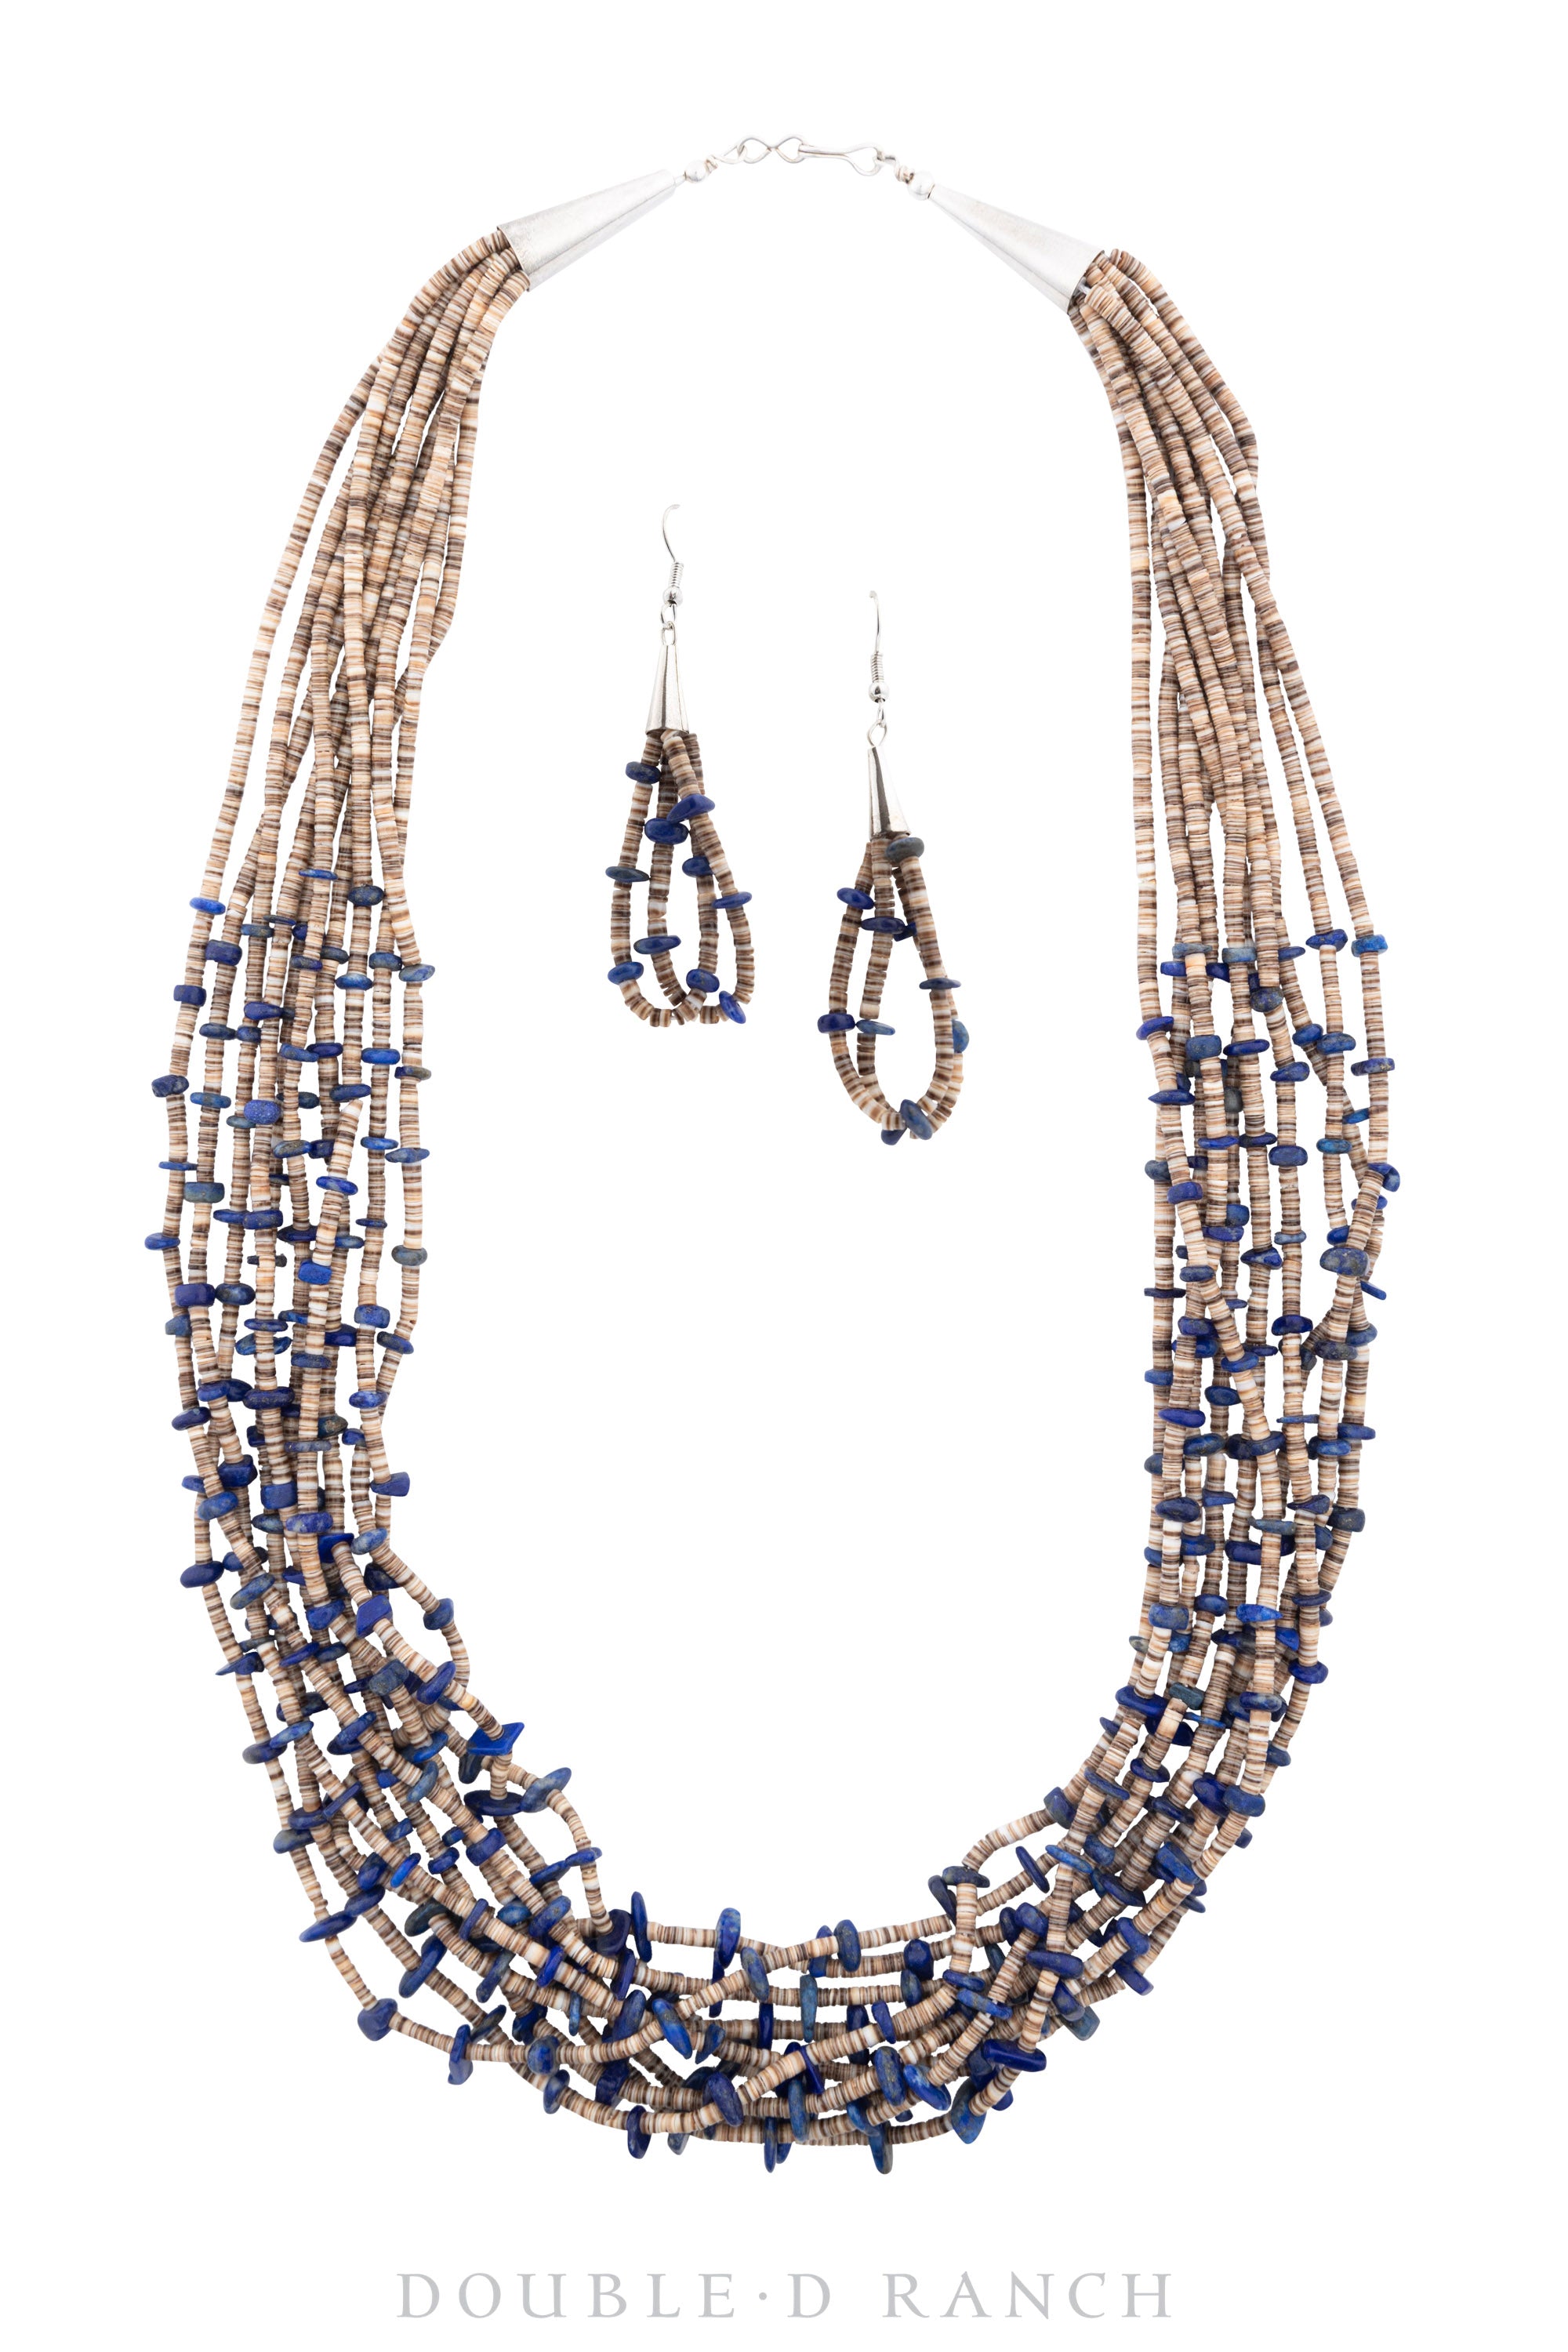 Necklace, Natural Stone, Heishi, Lapis, 10 Strand with Earrings, 24", Artisan, Contemporary, 3045